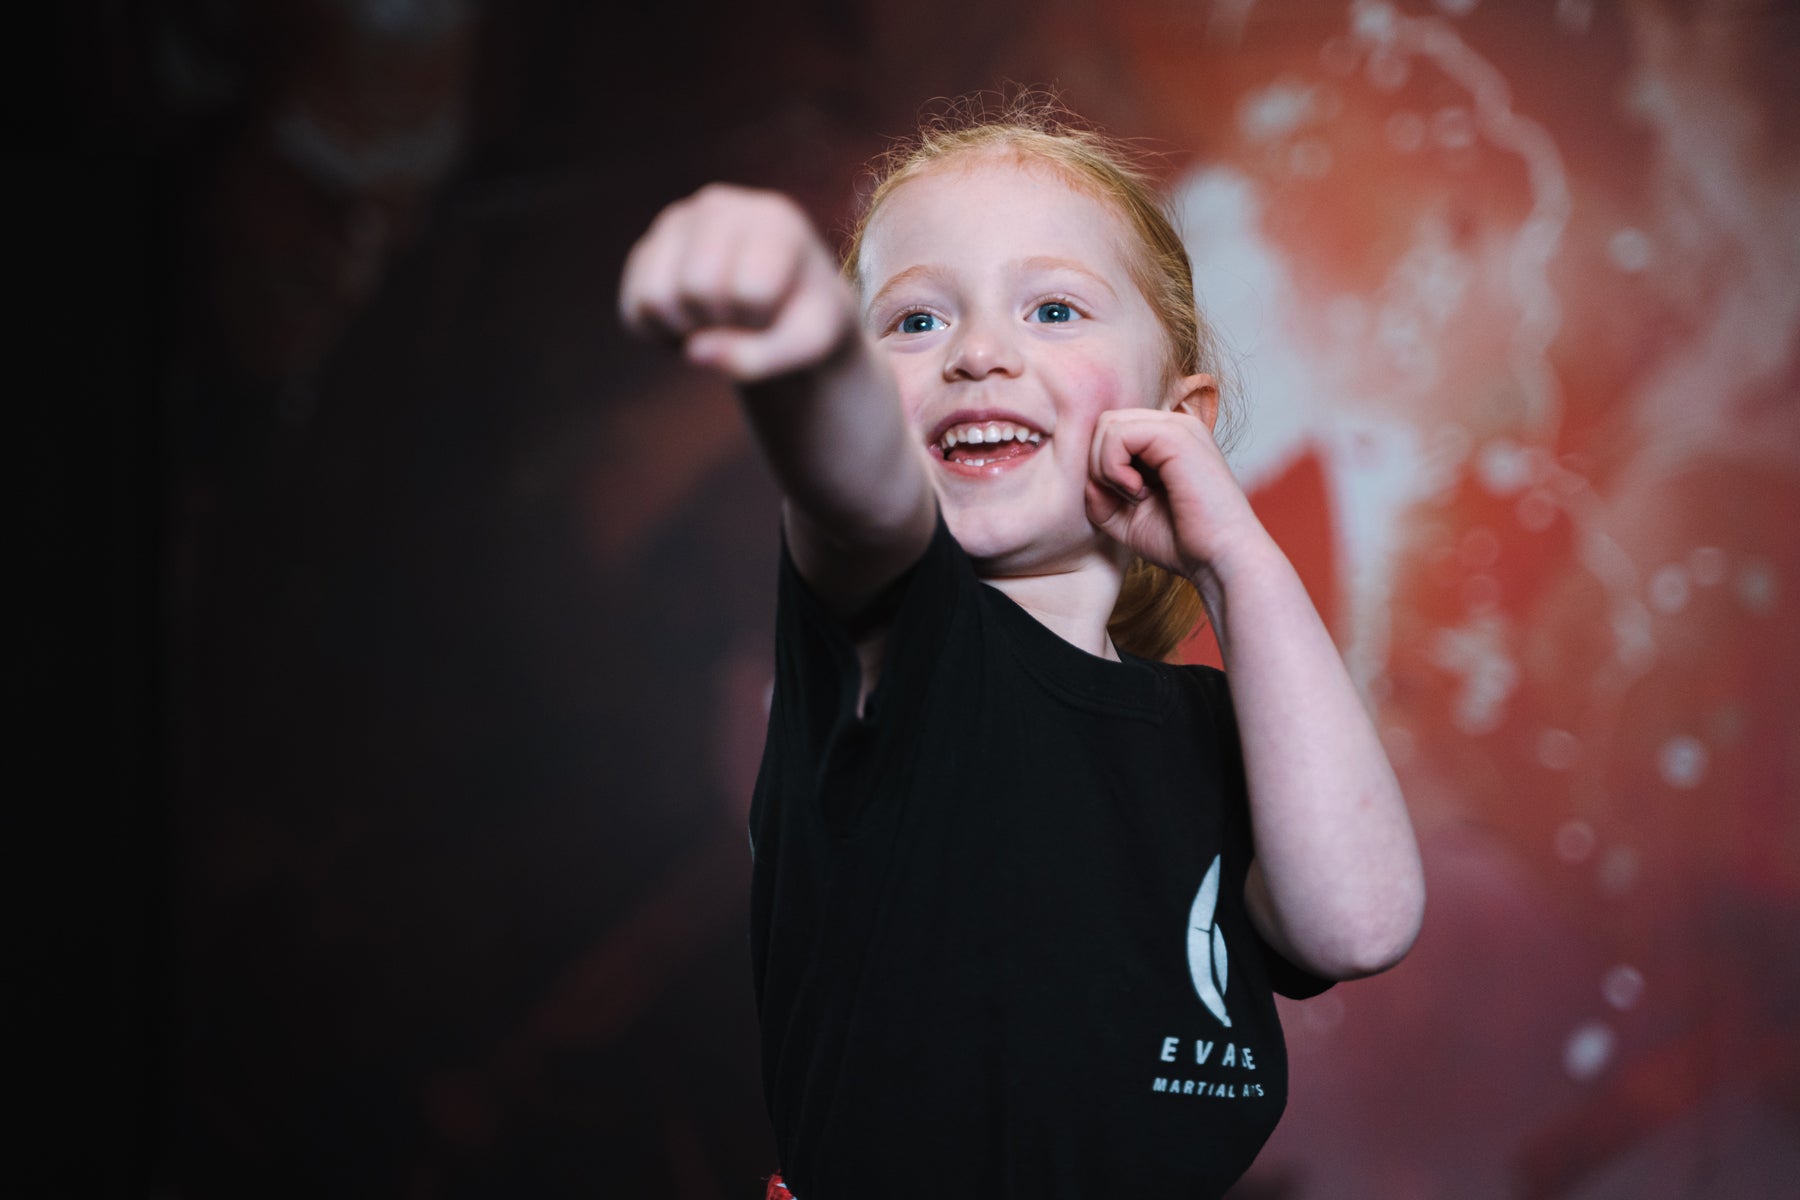 A photo of a young Evade Martial Arts student demonstrating a punch as part of the Evade Martial Arts Tameside and Children's Martial Arts Tameside programs